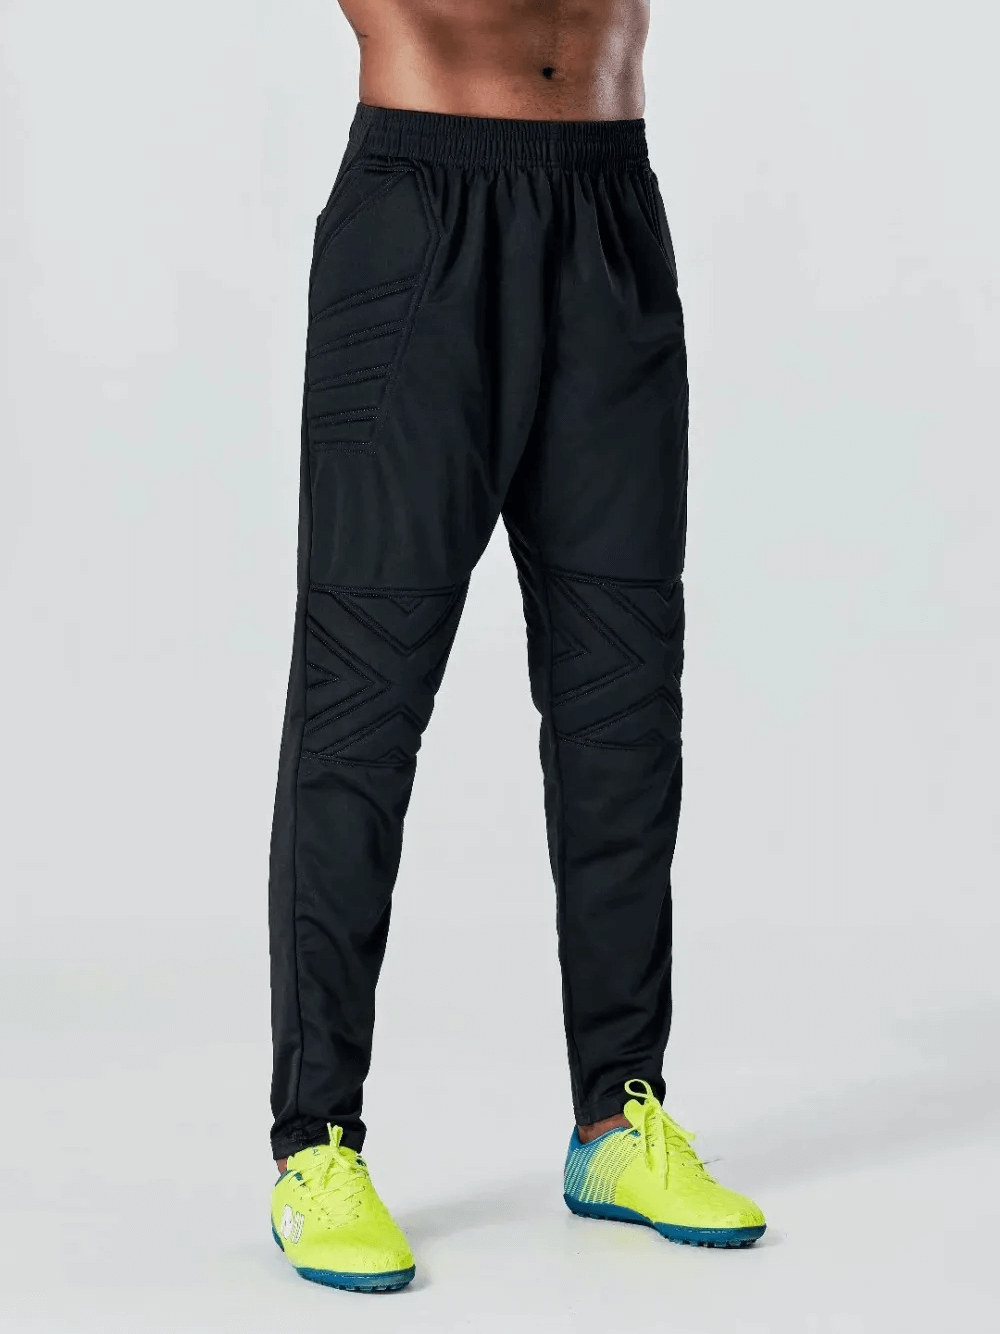 Elastic Waist Men's Training Pants With Protective Padded - SF1565